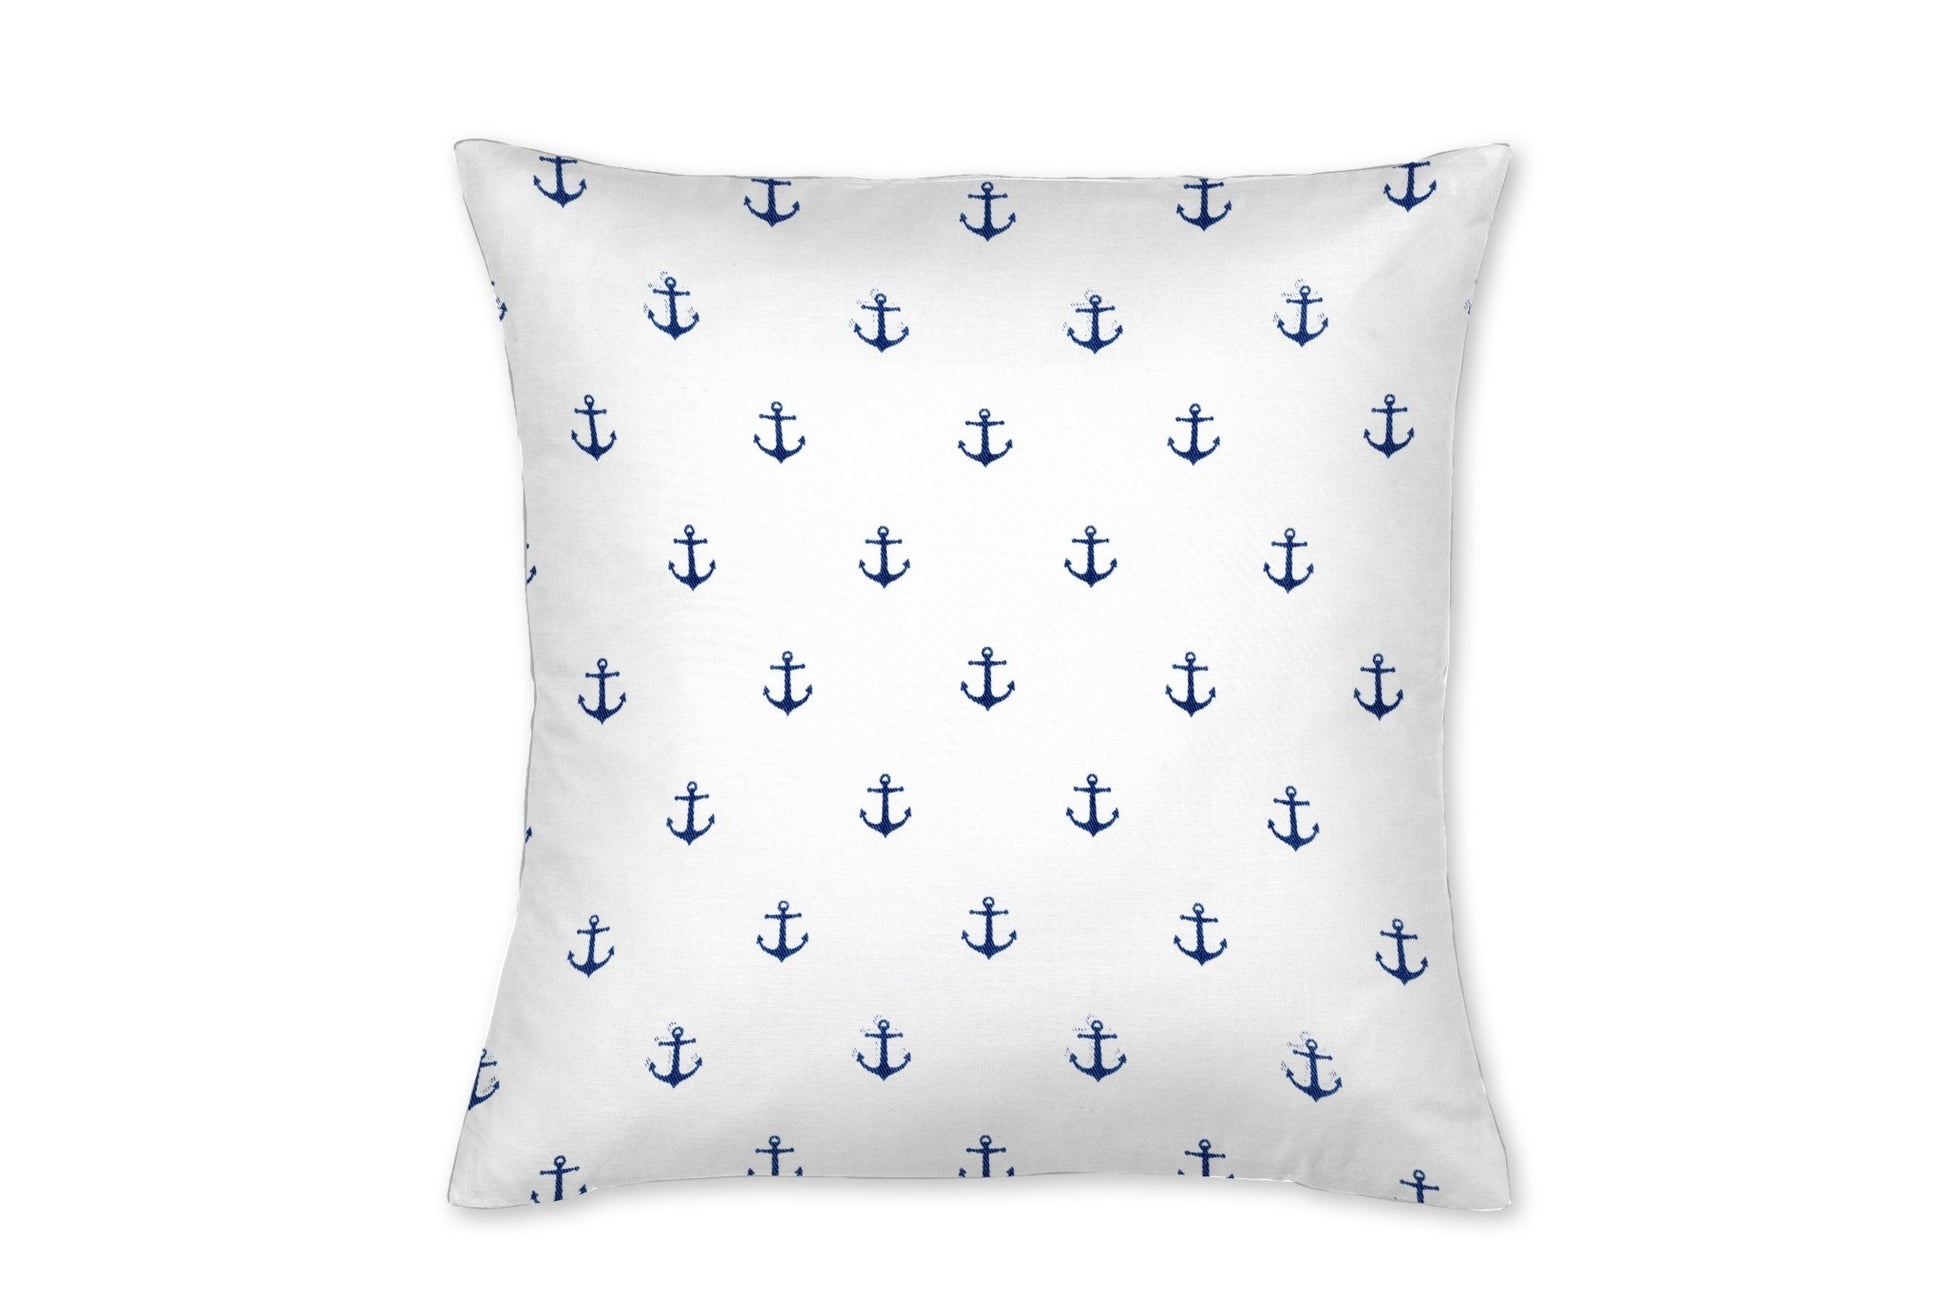 White and Navy Mini Anchors Throw Pillow - New Arrivals Inc